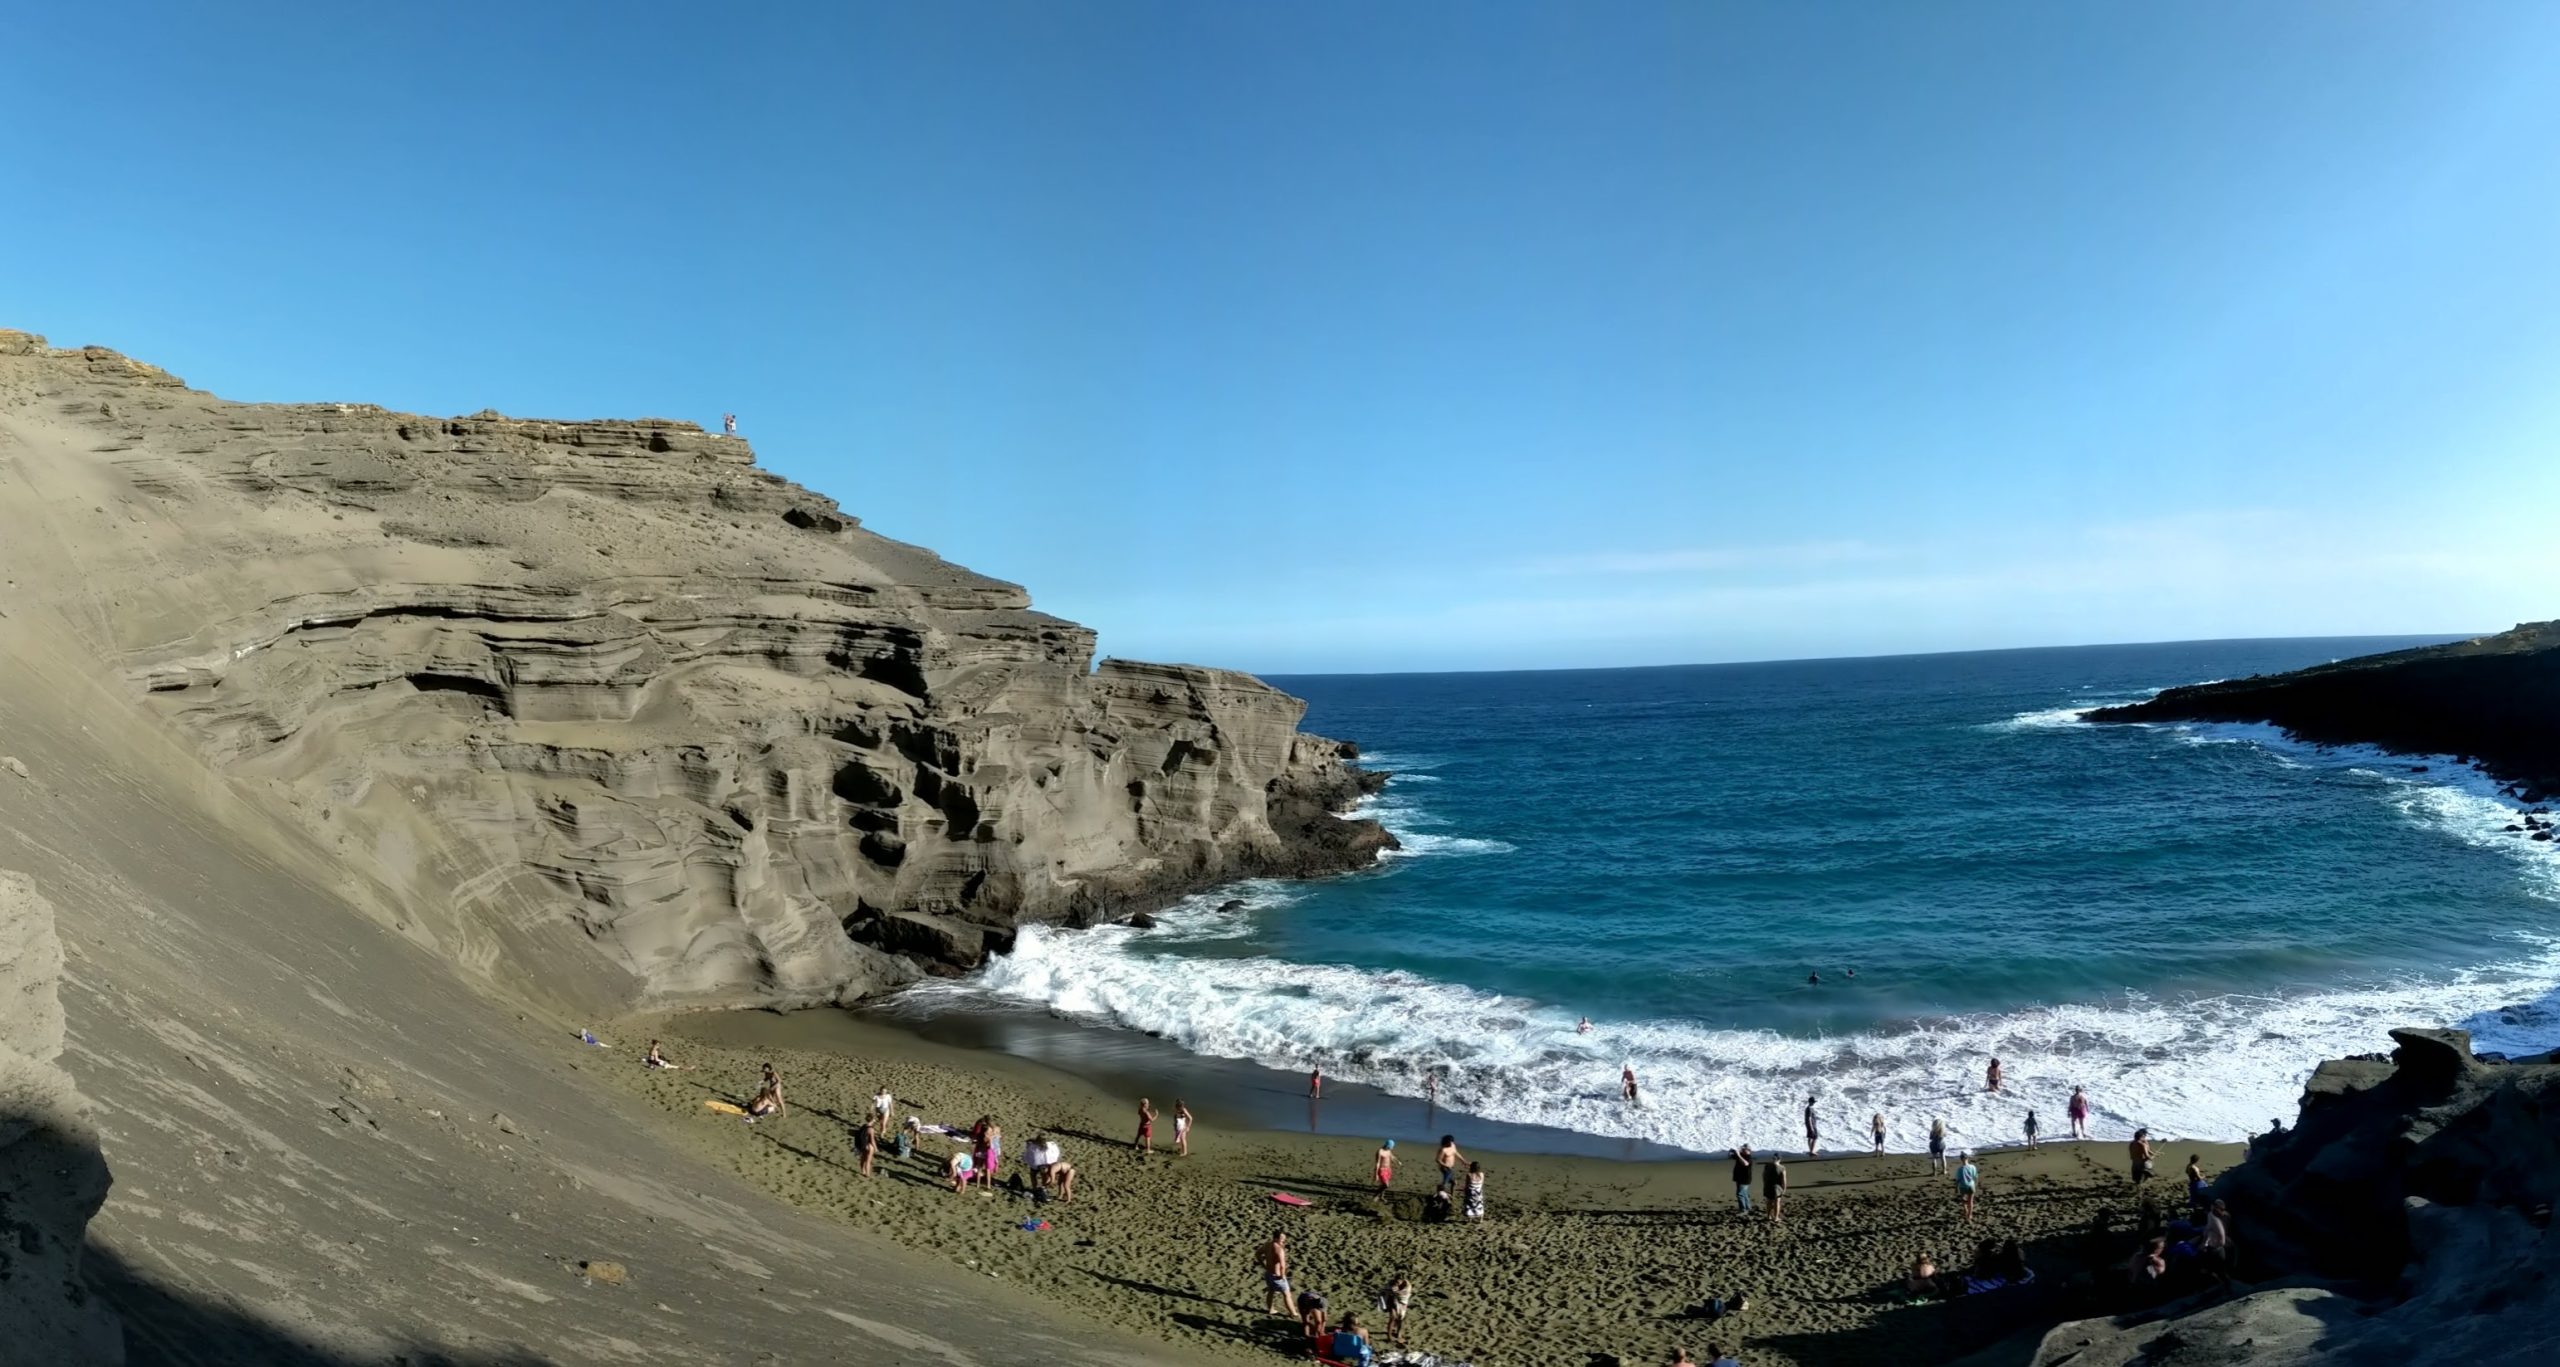 Beach cove with green sand and numerous people; surrounding the cove are black layers of volcanic rock.